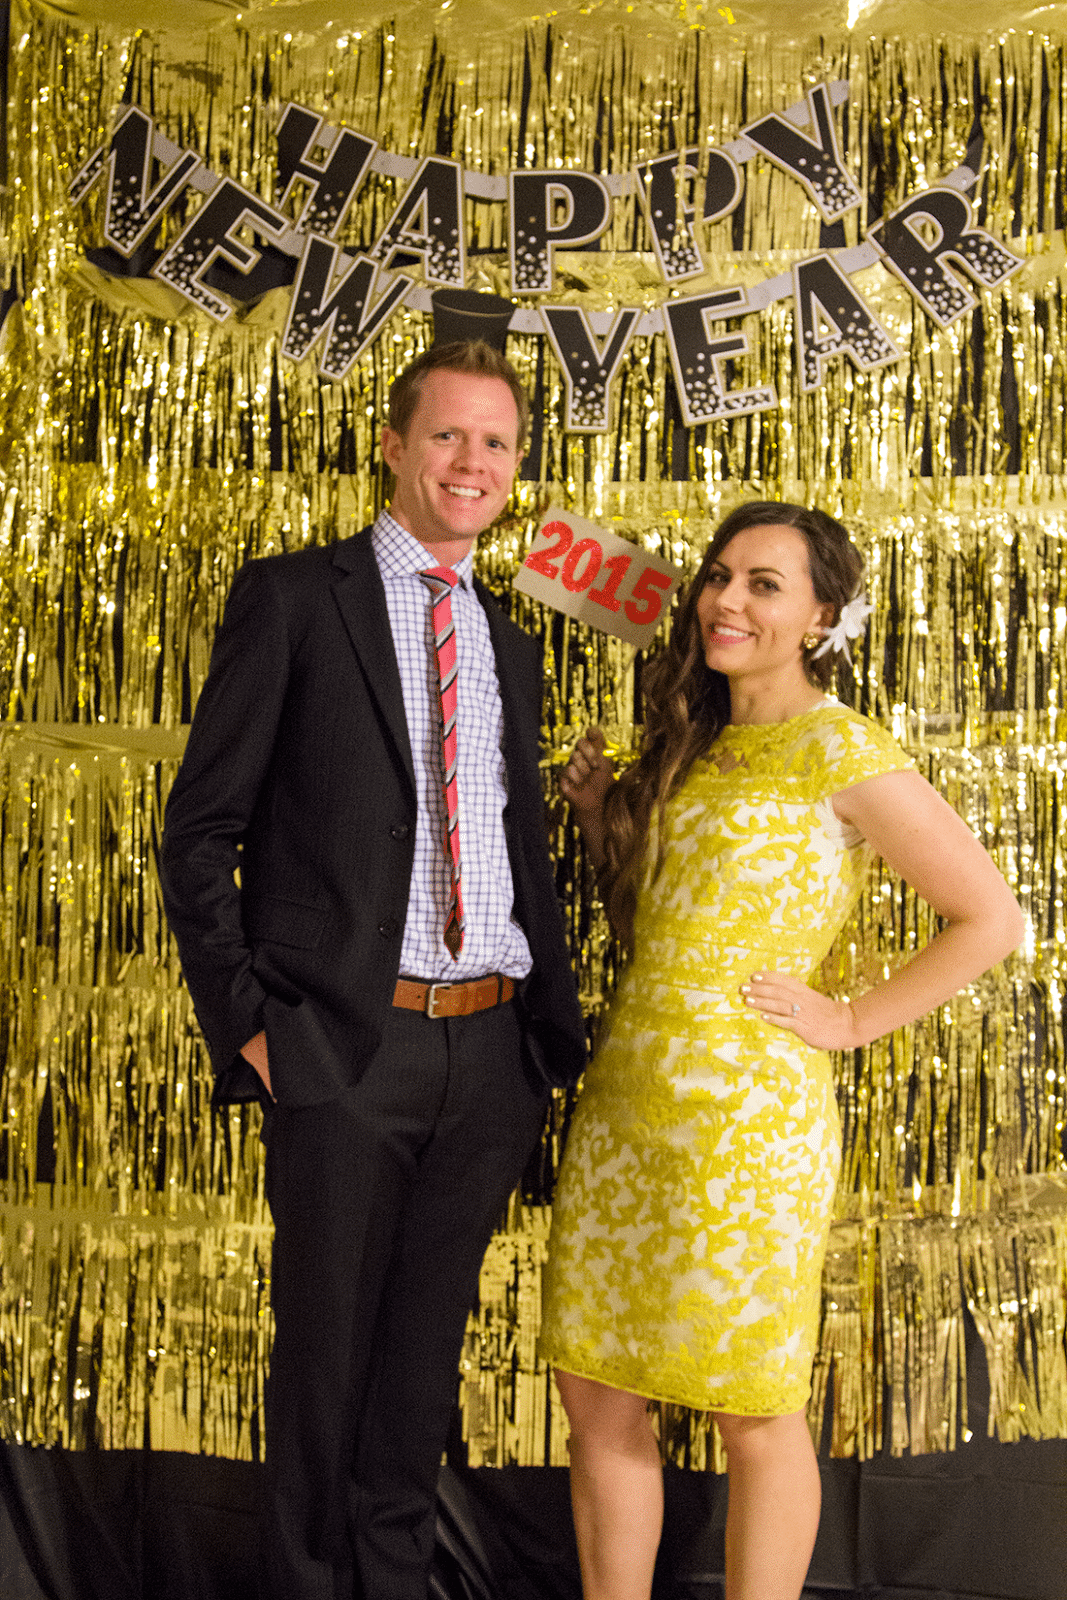 New Year party ideas with a fun photo backdrop. 